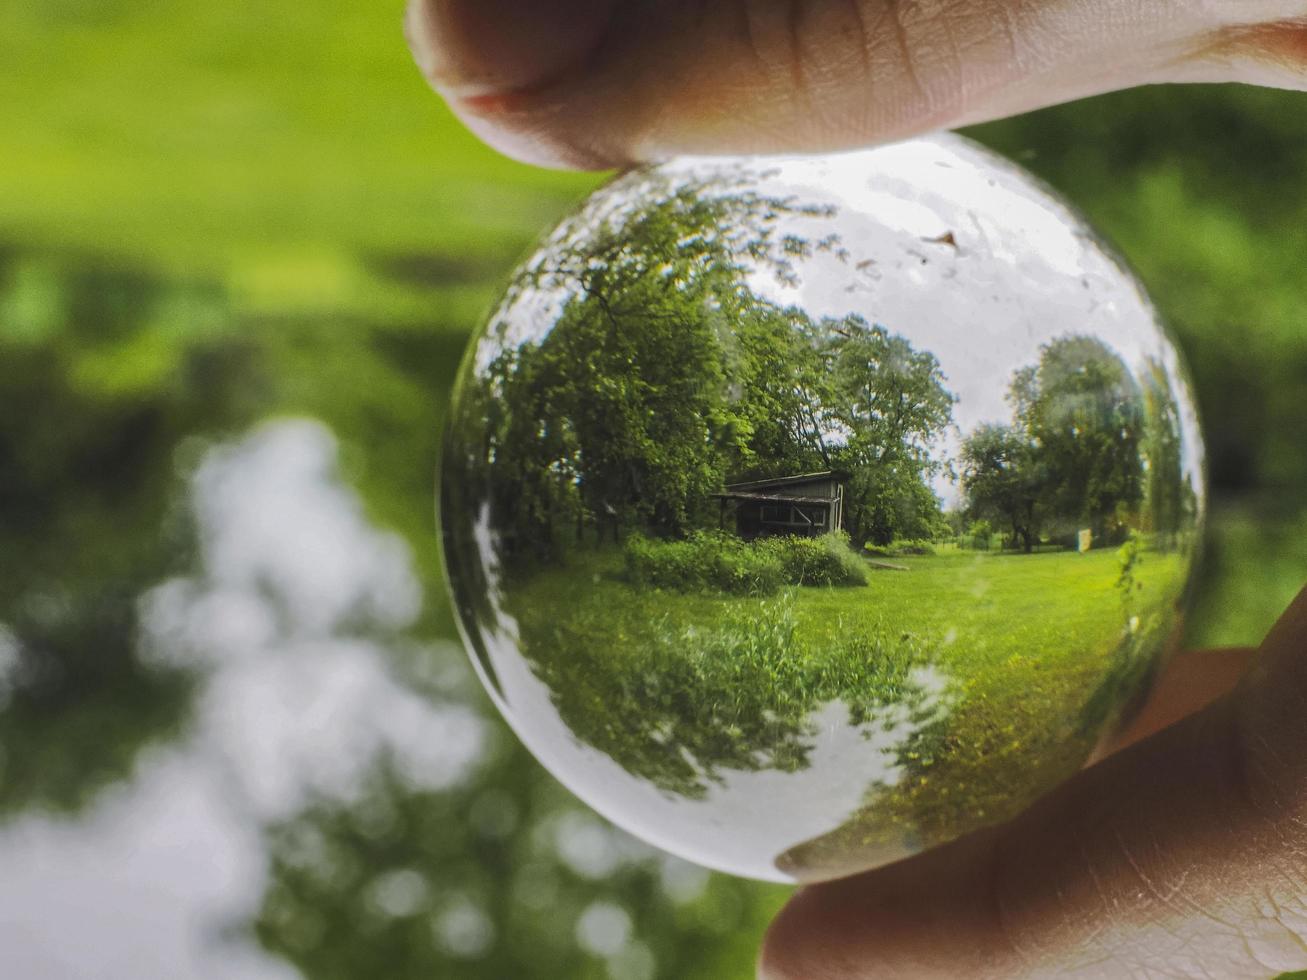 A shed seen through a glass ball held by hand photo